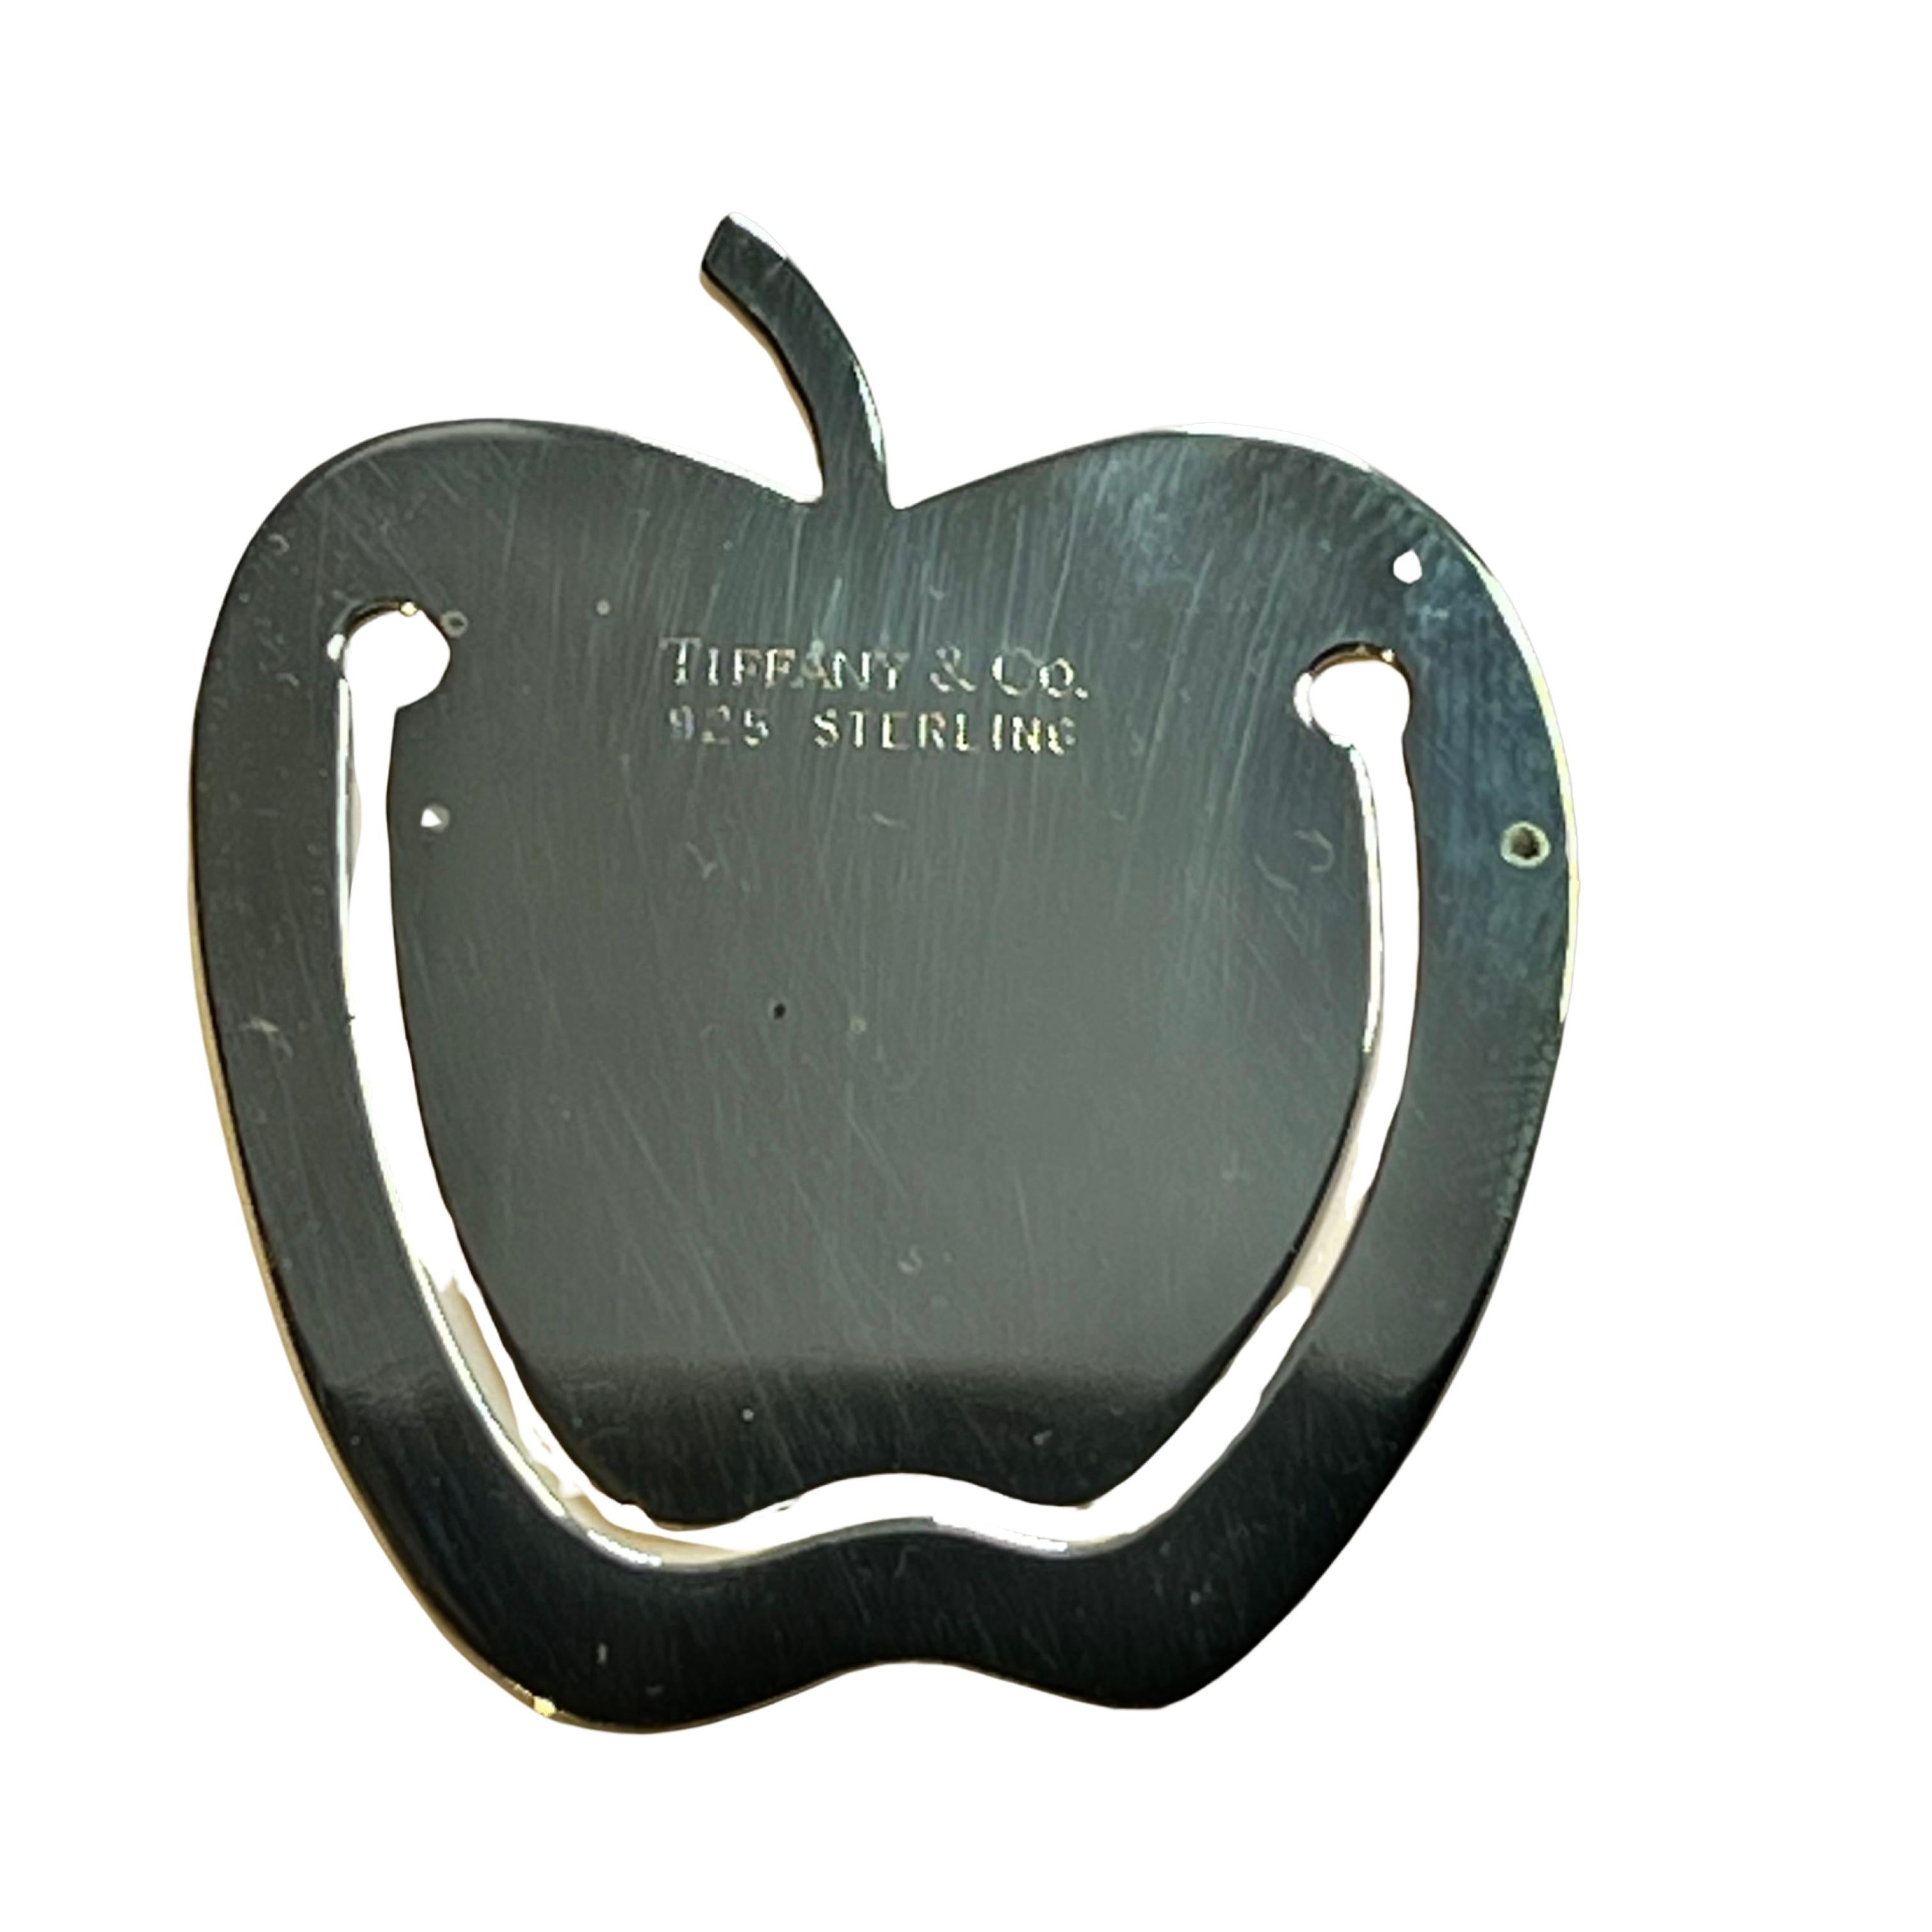 Tiffany & Co Estate Apple Bookmark Sterling Silver TIF529

TRUSTED SELLER SINCE 2002

PLEASE SEE OUR HUNDREDS OF POSITIVE FEEDBACKS FROM OUR CLIENTS!!

FREE SHIPPING

This elegant Authentic Tiffany & Co. sterling silver has a weight of 6.90